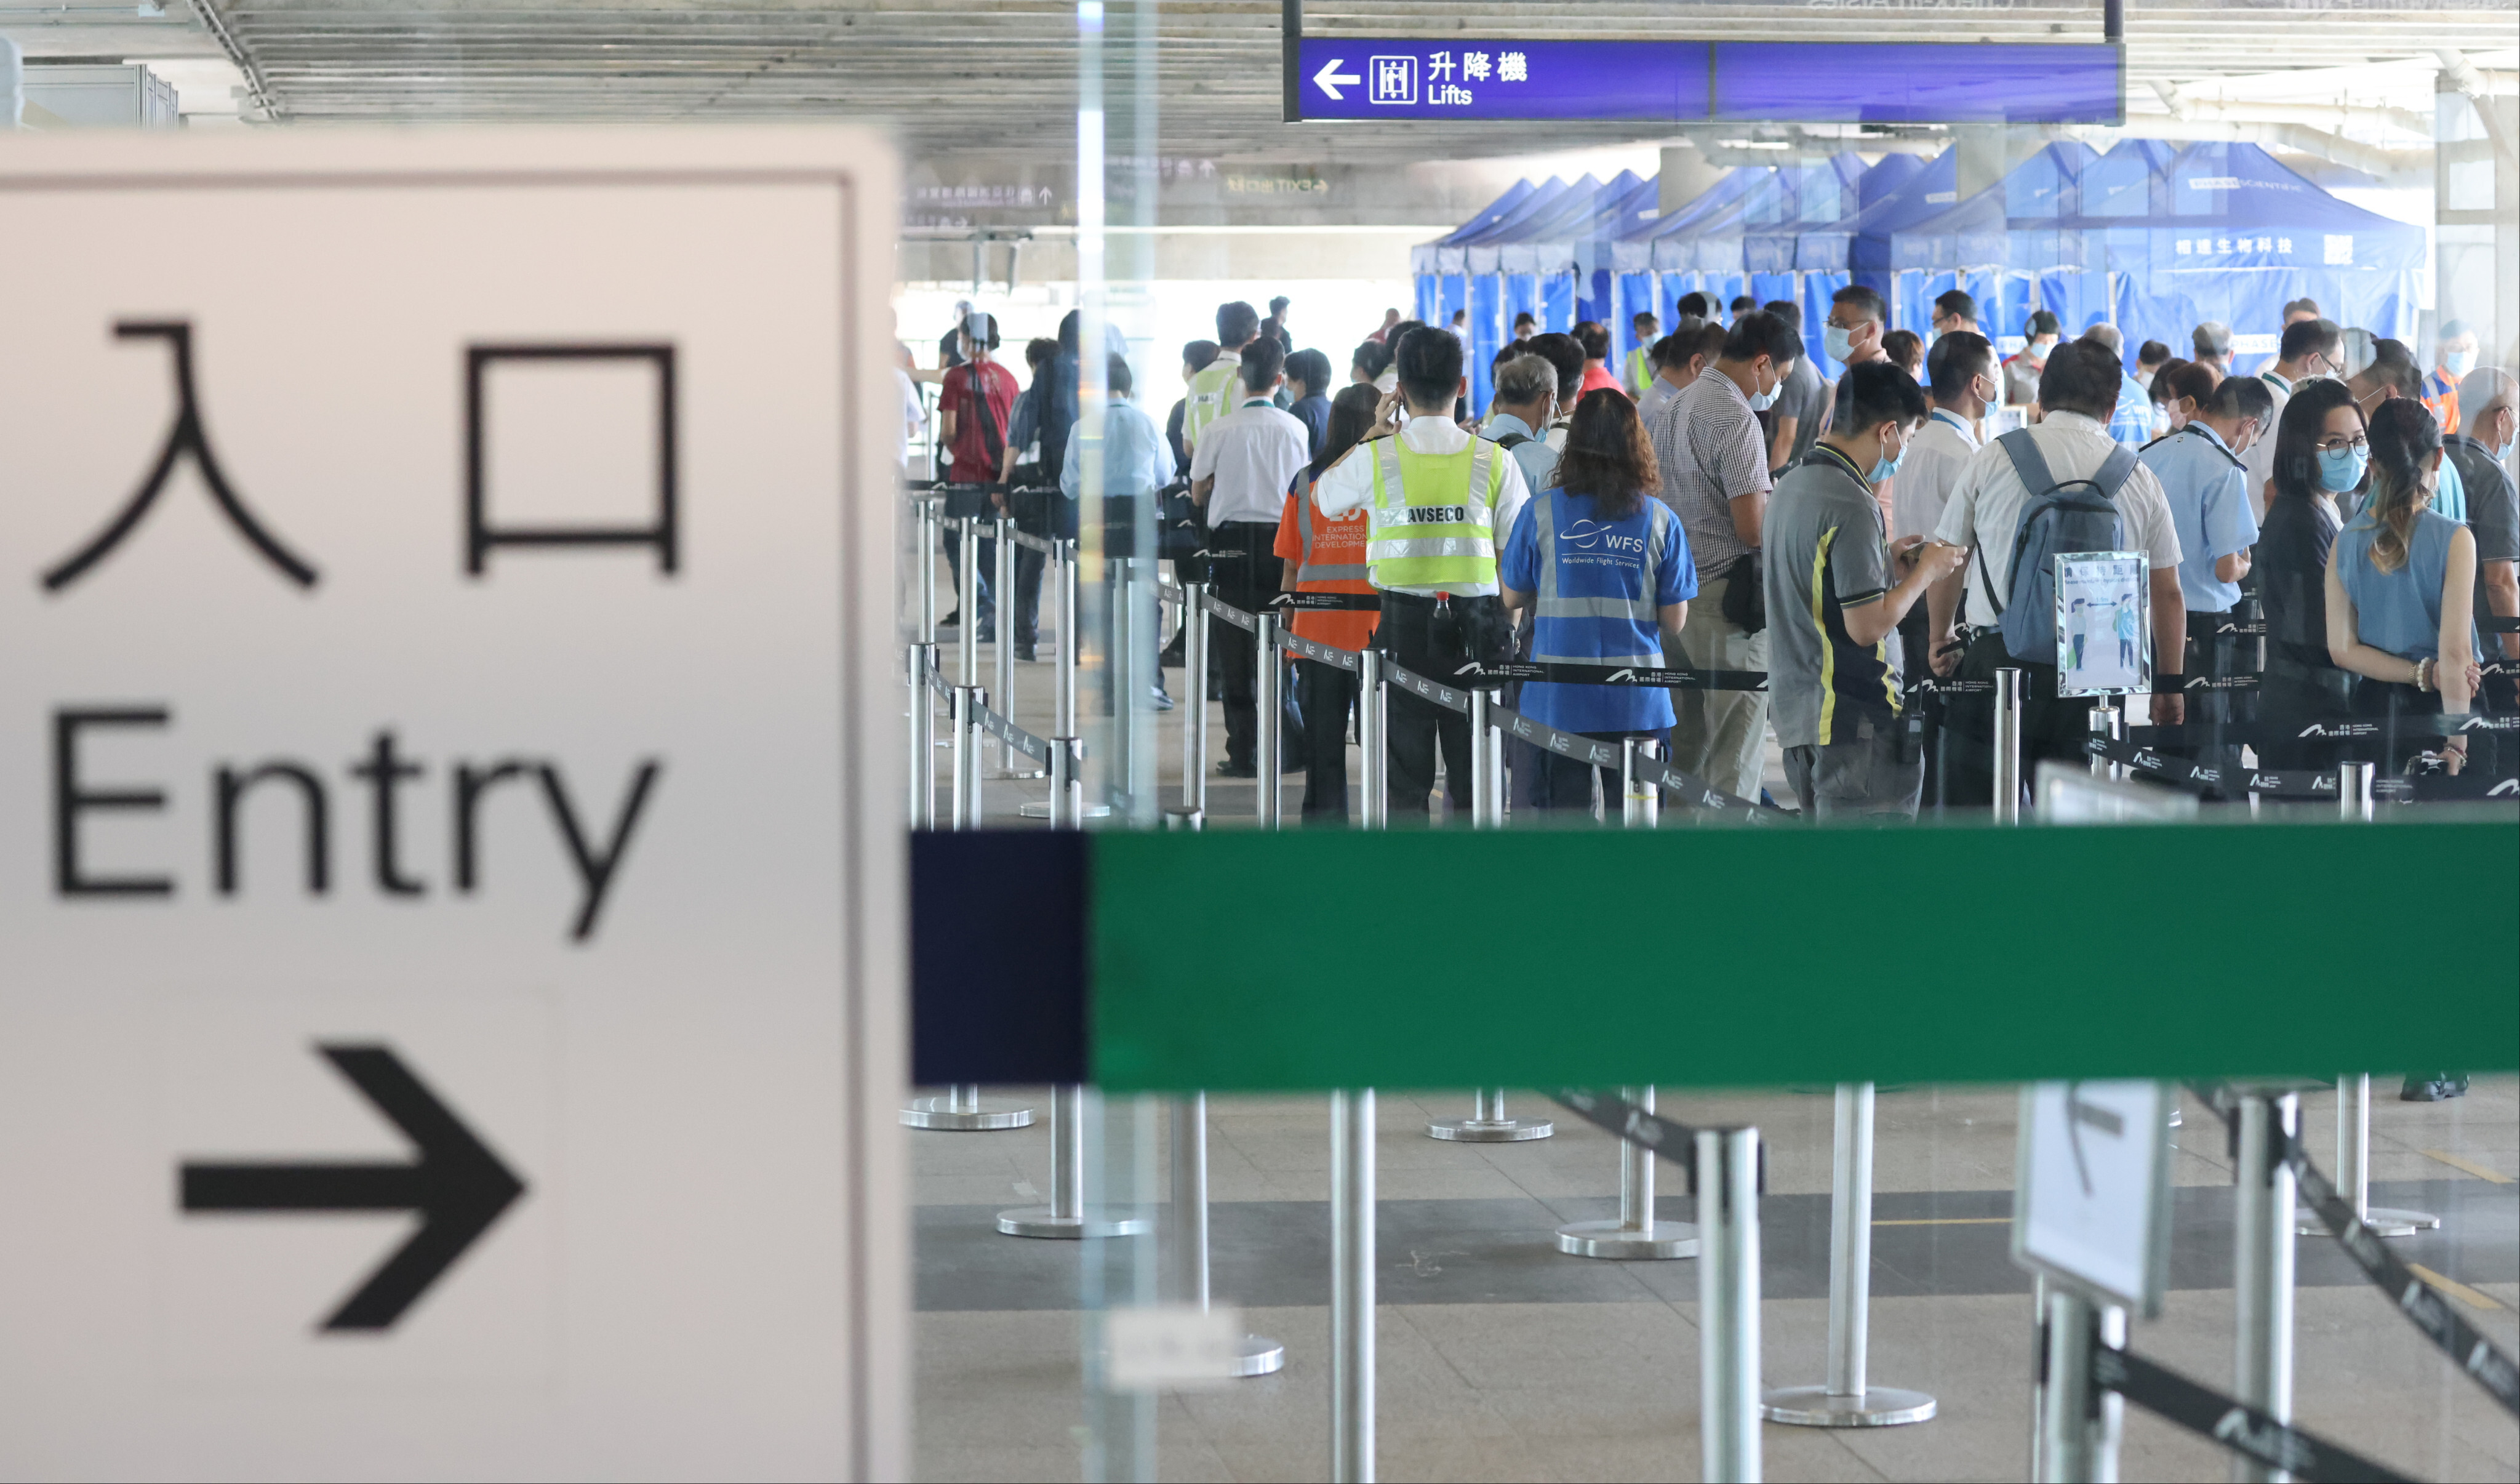 Airport staff subject to compulsory testing queue up for Covid testing at a mobile specimen collection station  in Terminal 1 of the Hong Kong International Airport on July 13. Photo: Nora Tam